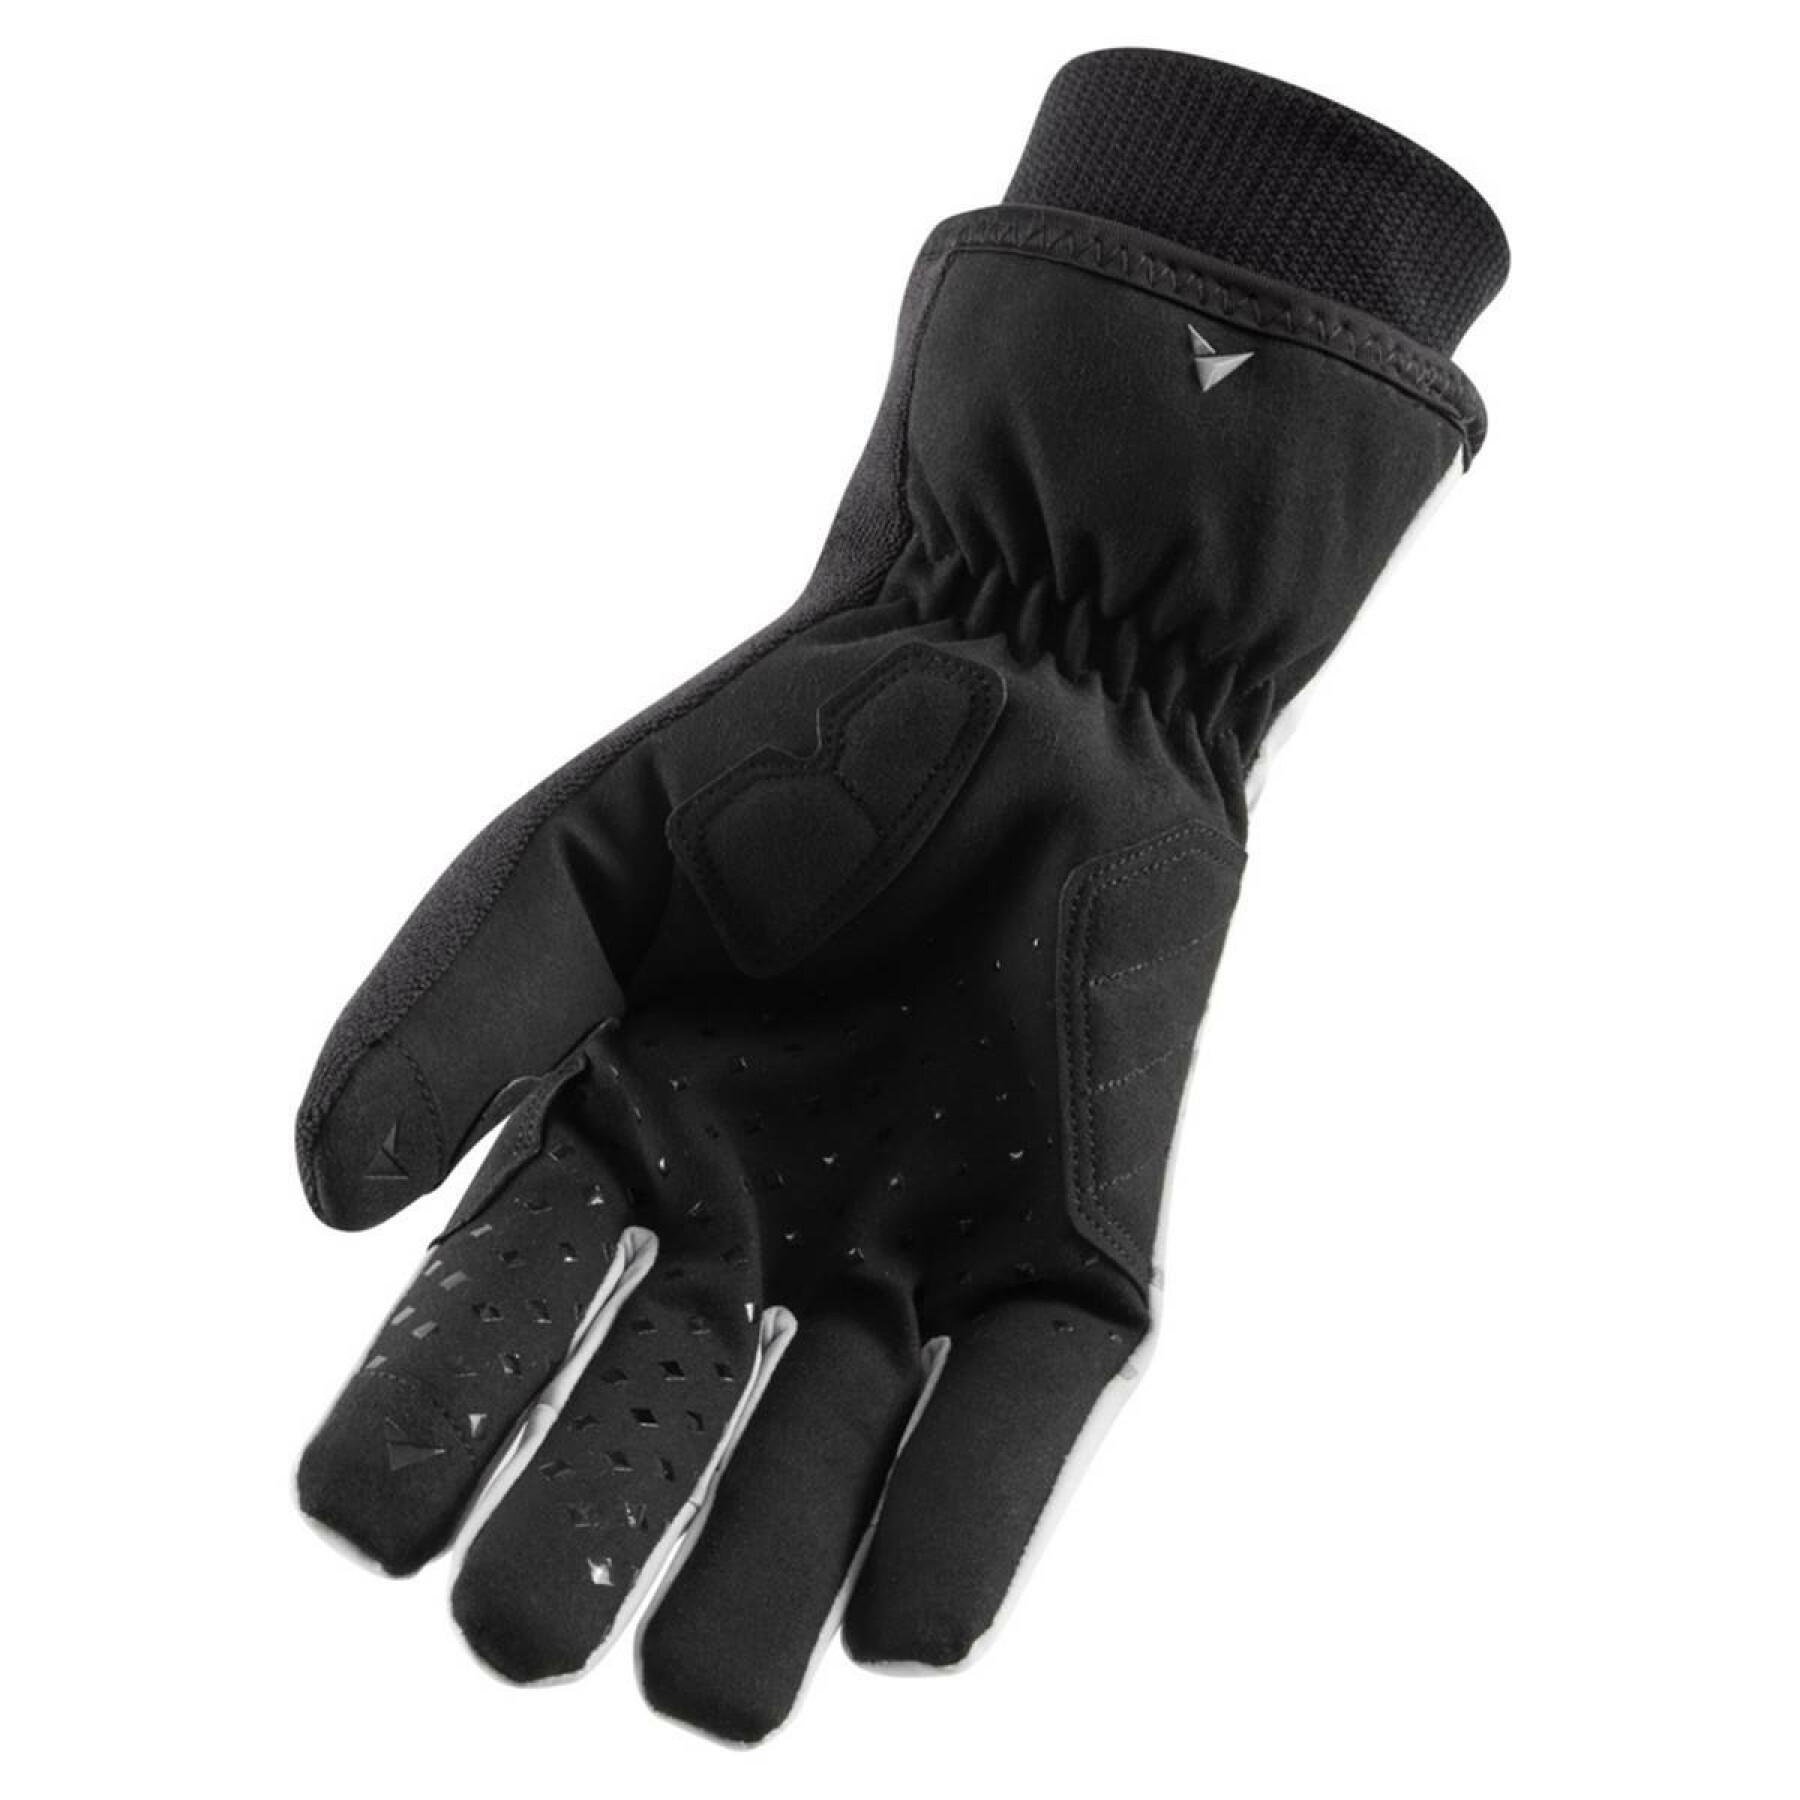 Long insulating waterproof gloves Altura Nightvision